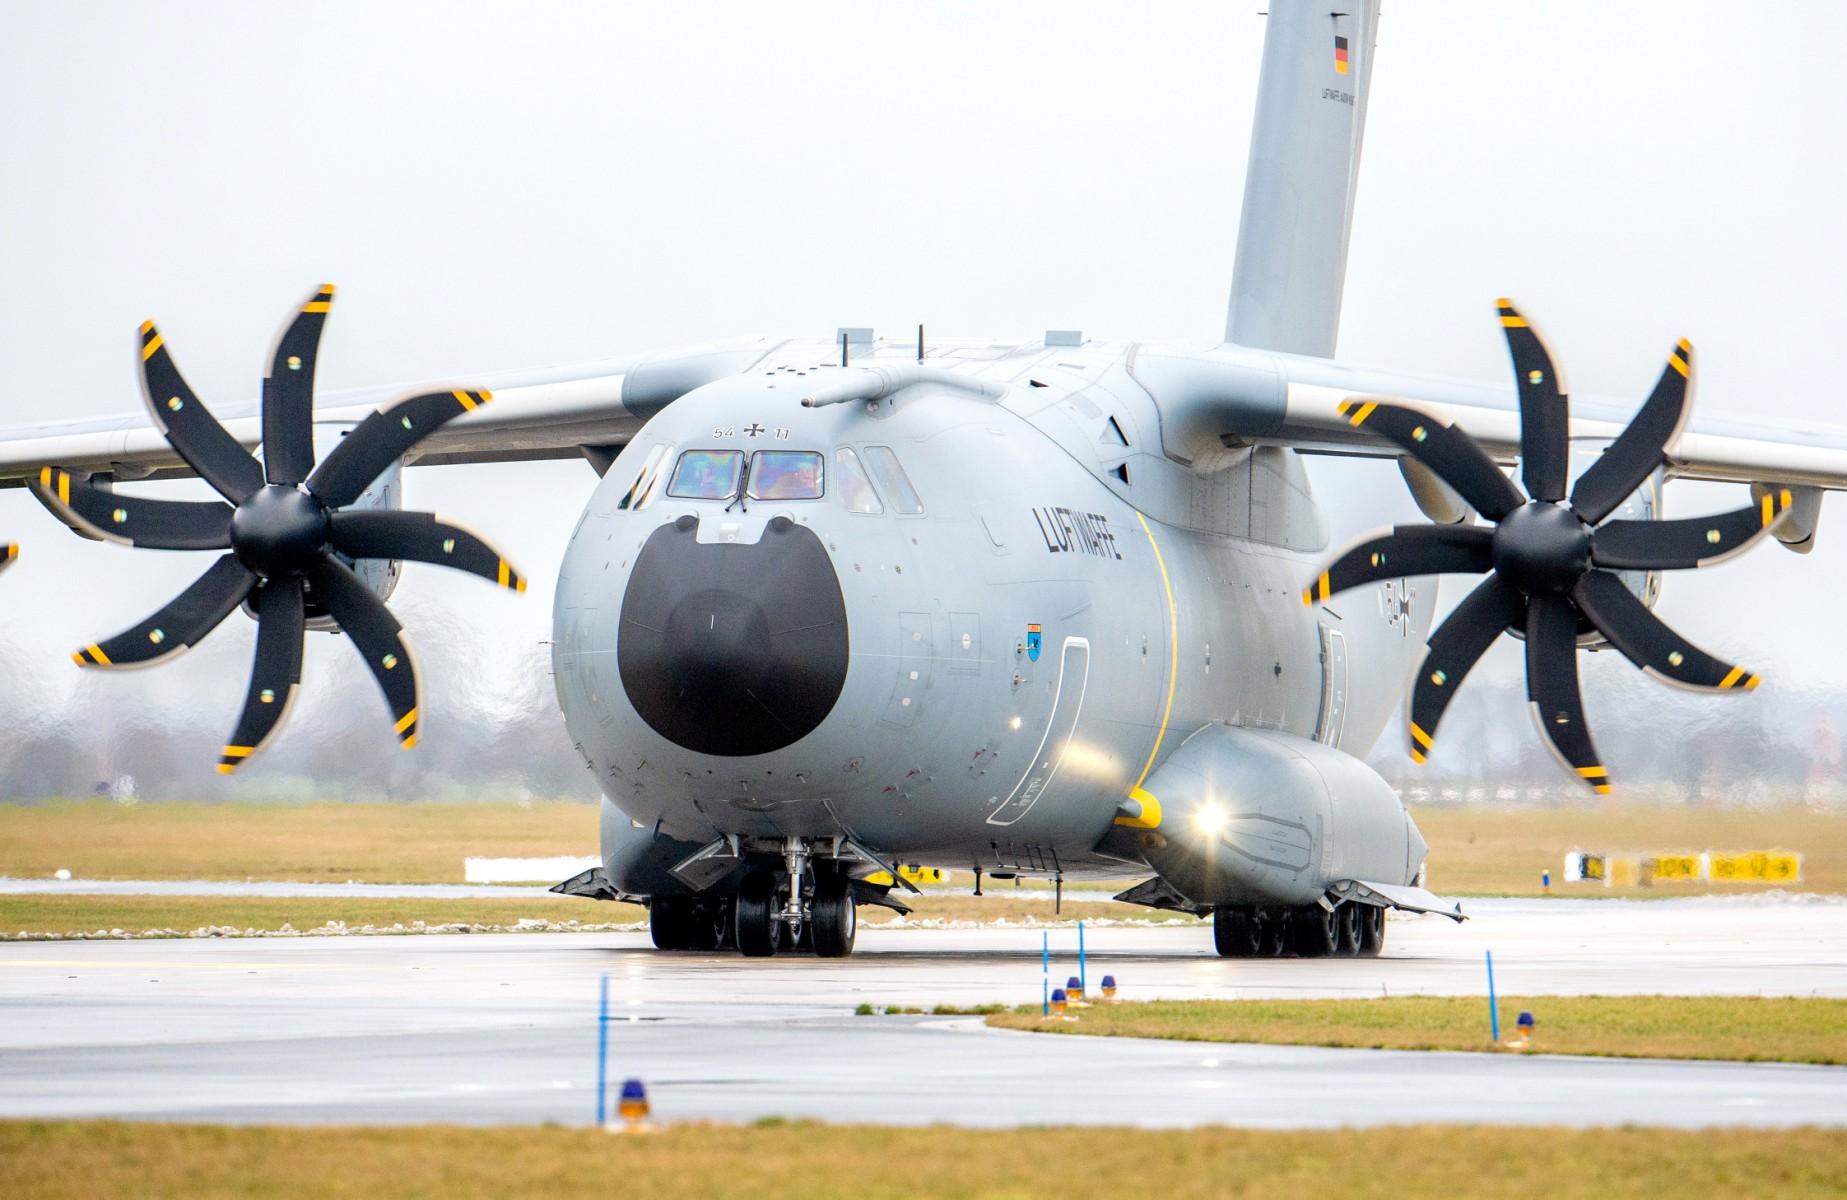 An Airbus A400M military transport plane of the German Air Force prepares to take off from the military airport in Wunstorf near Hanover, northwestern Germany, on Feb 3, 2021. Photo: AFP